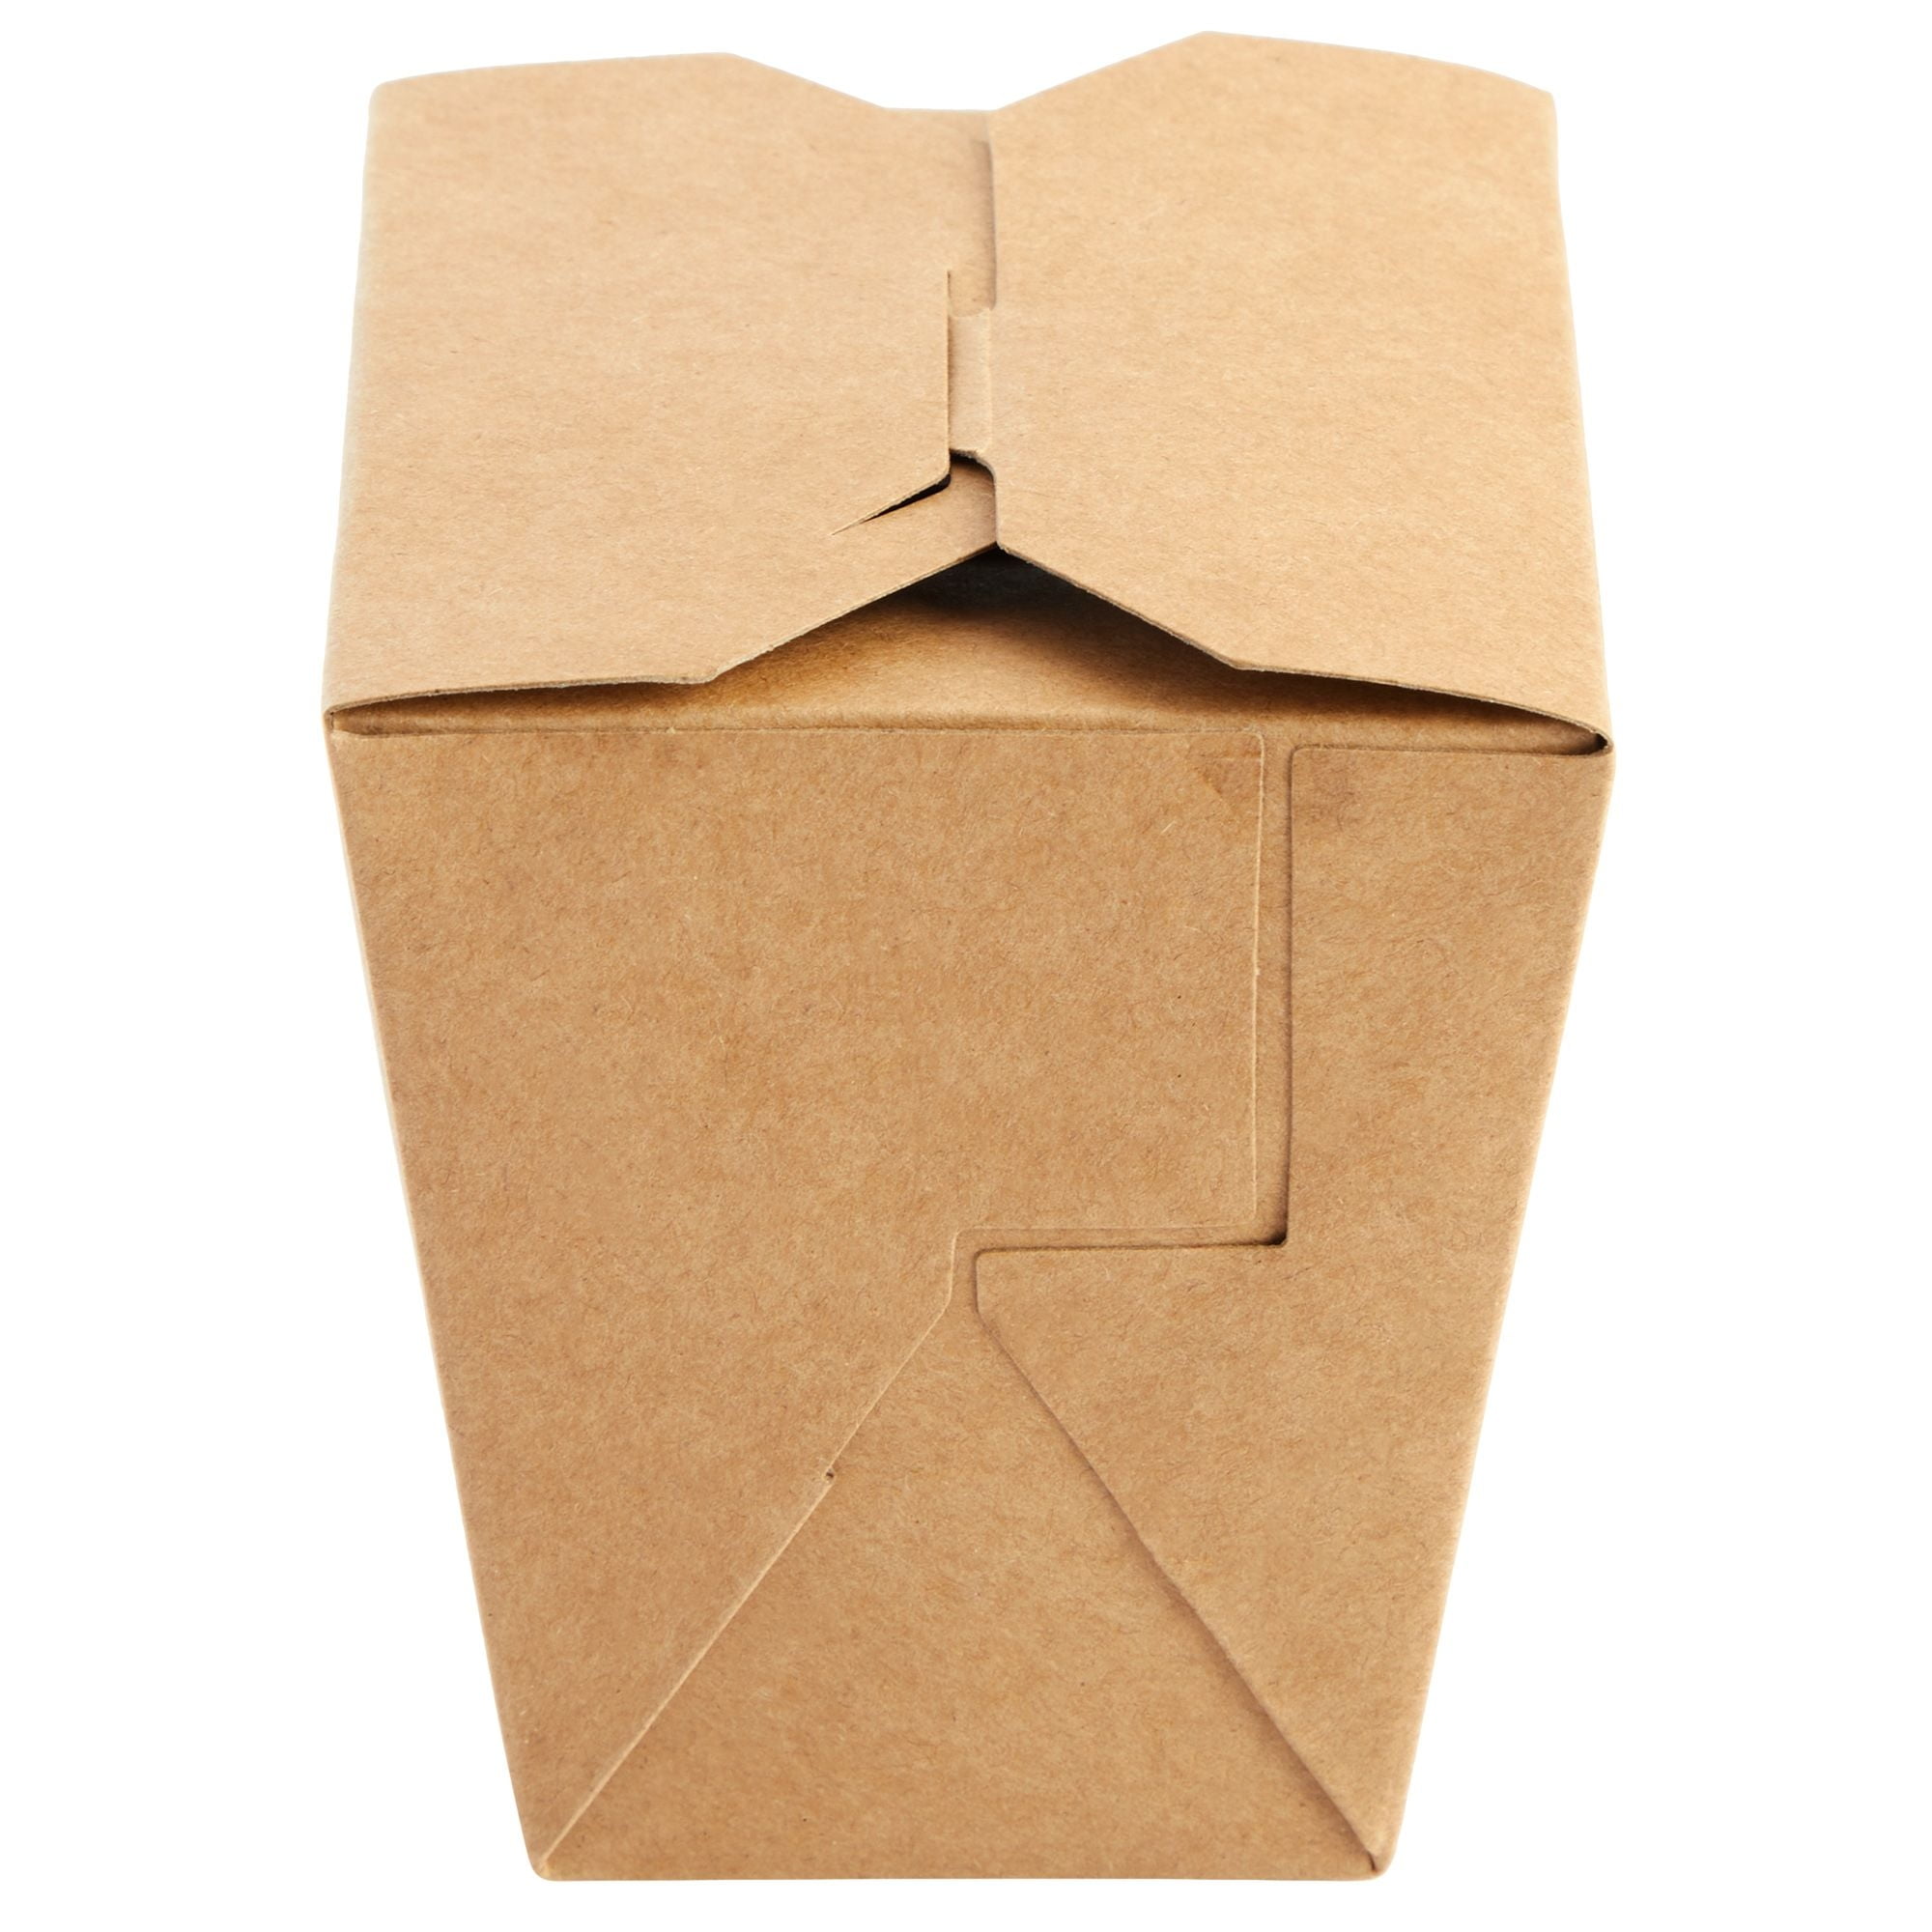 16 oz Takeout Boxes Food Containers White Paperboard Chinese Asian